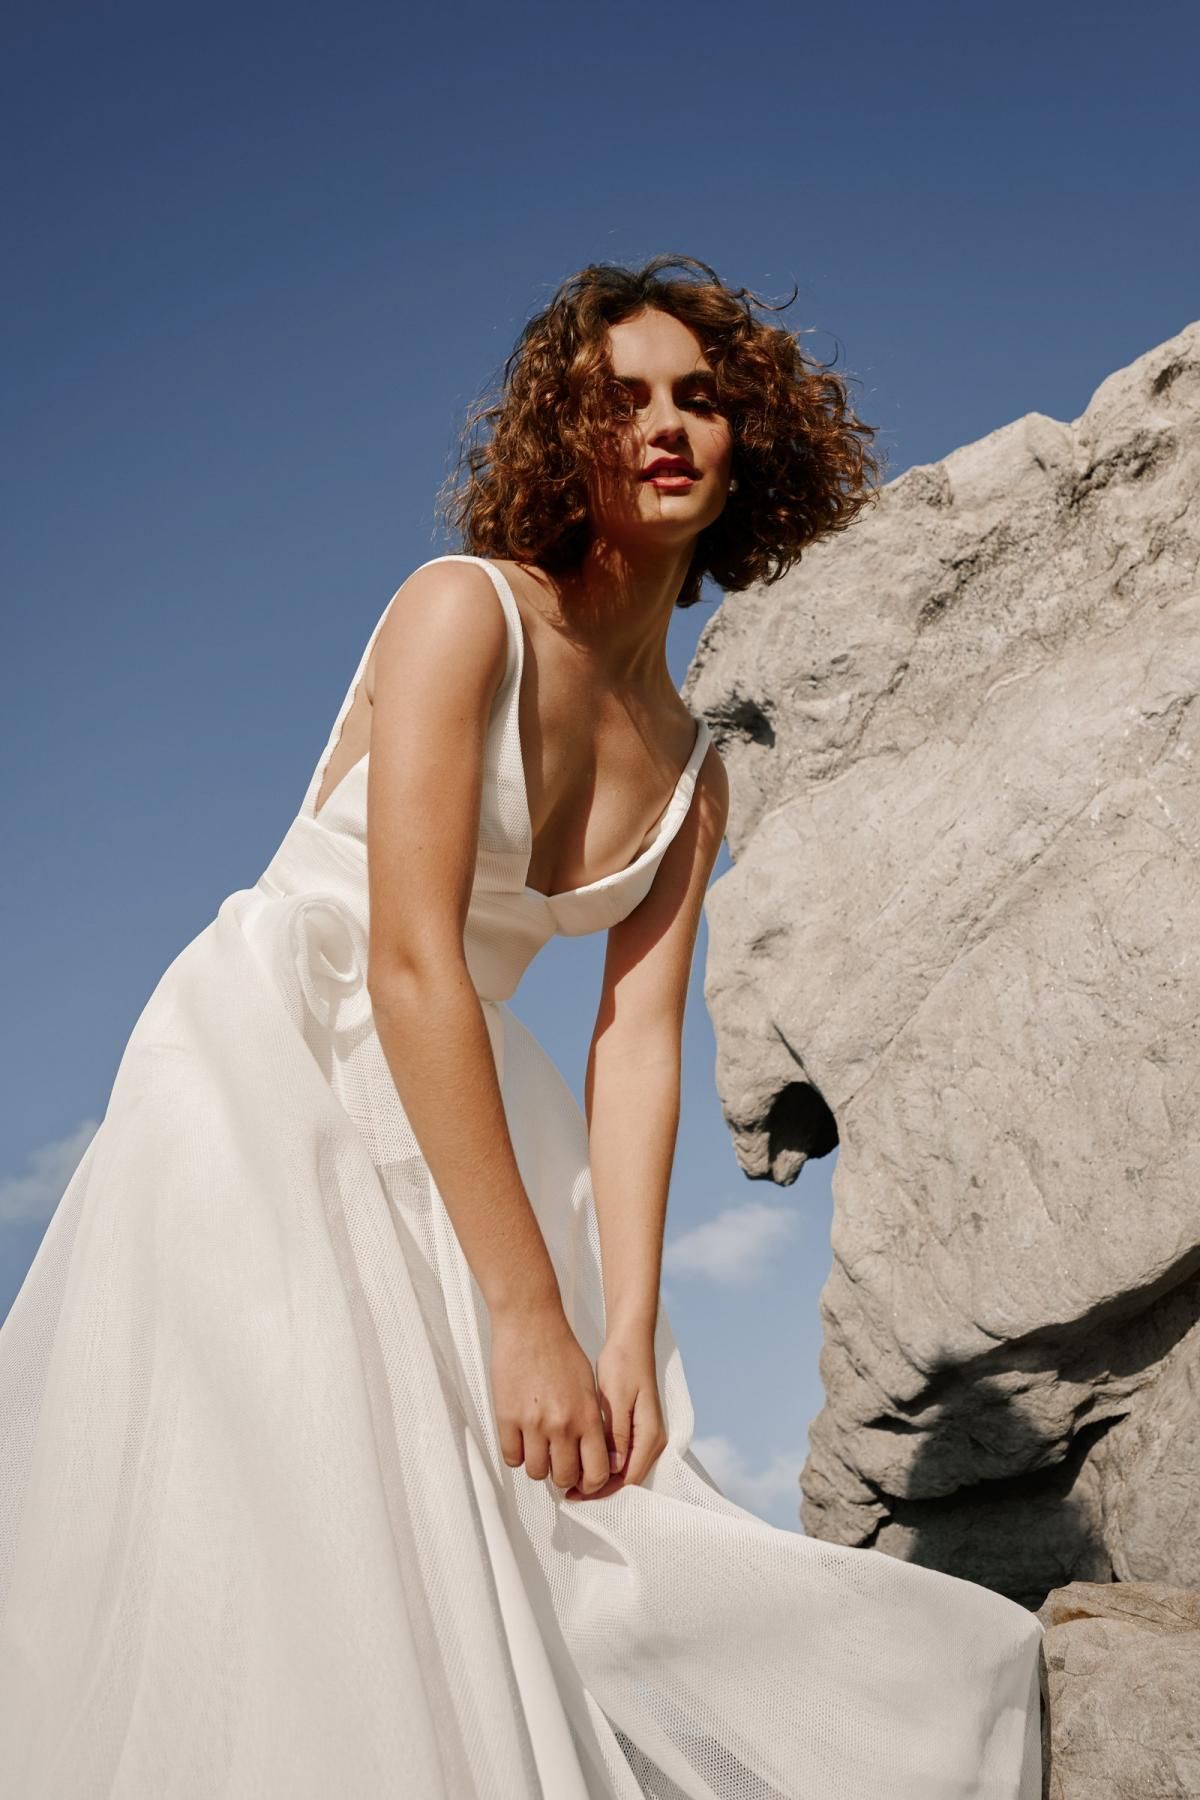 The Aisha gown by Karen Willis Holmes, v-neck wedding dress with rosette detail.